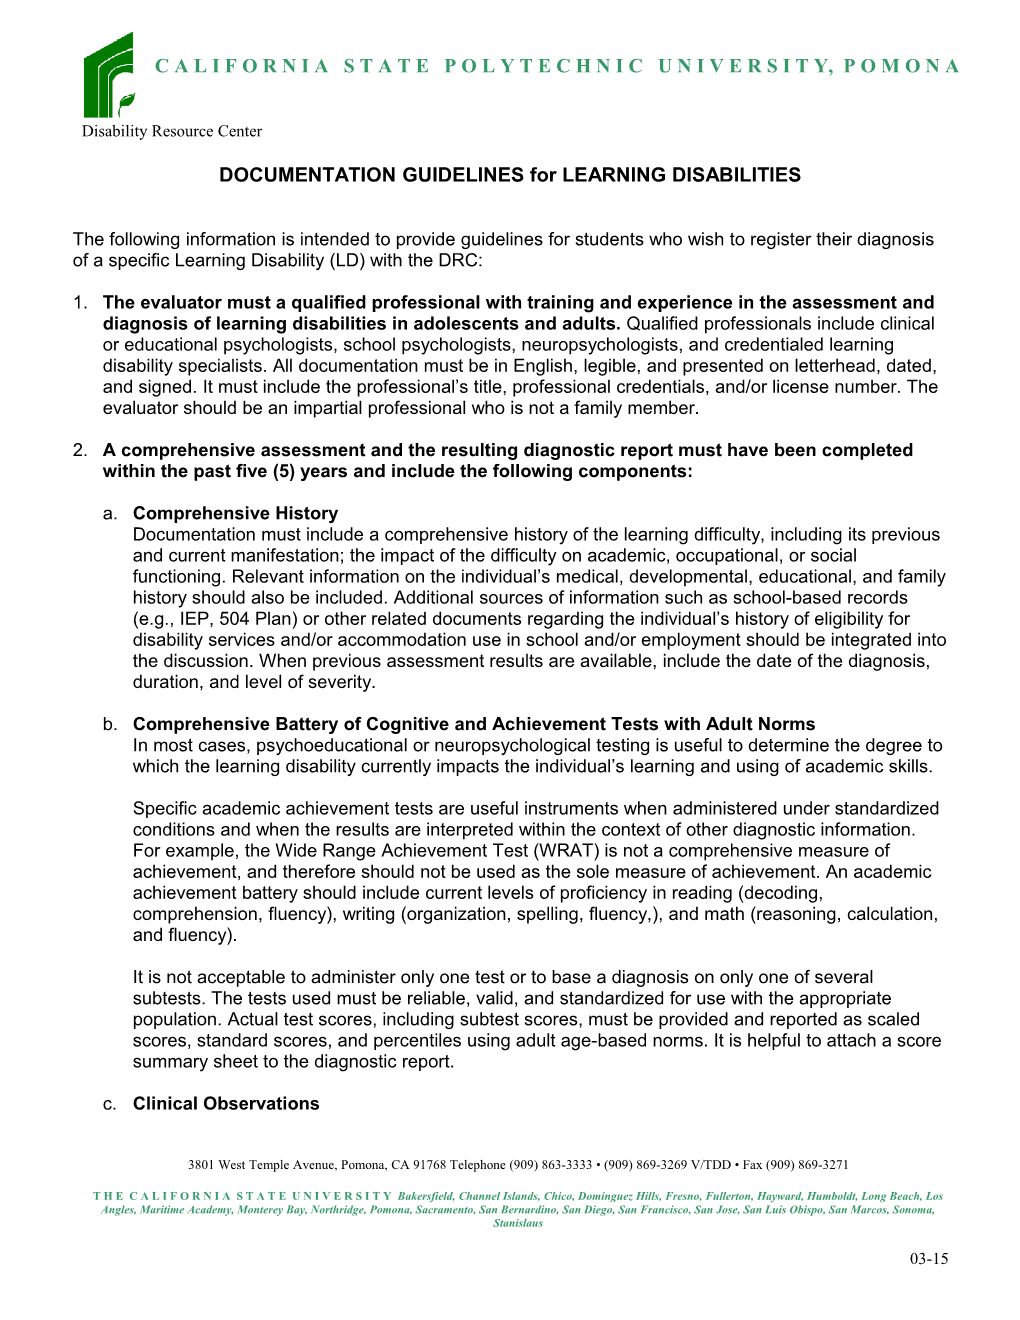 DOCUMENTATION GUIDELINES for LEARNING DISABILITIES